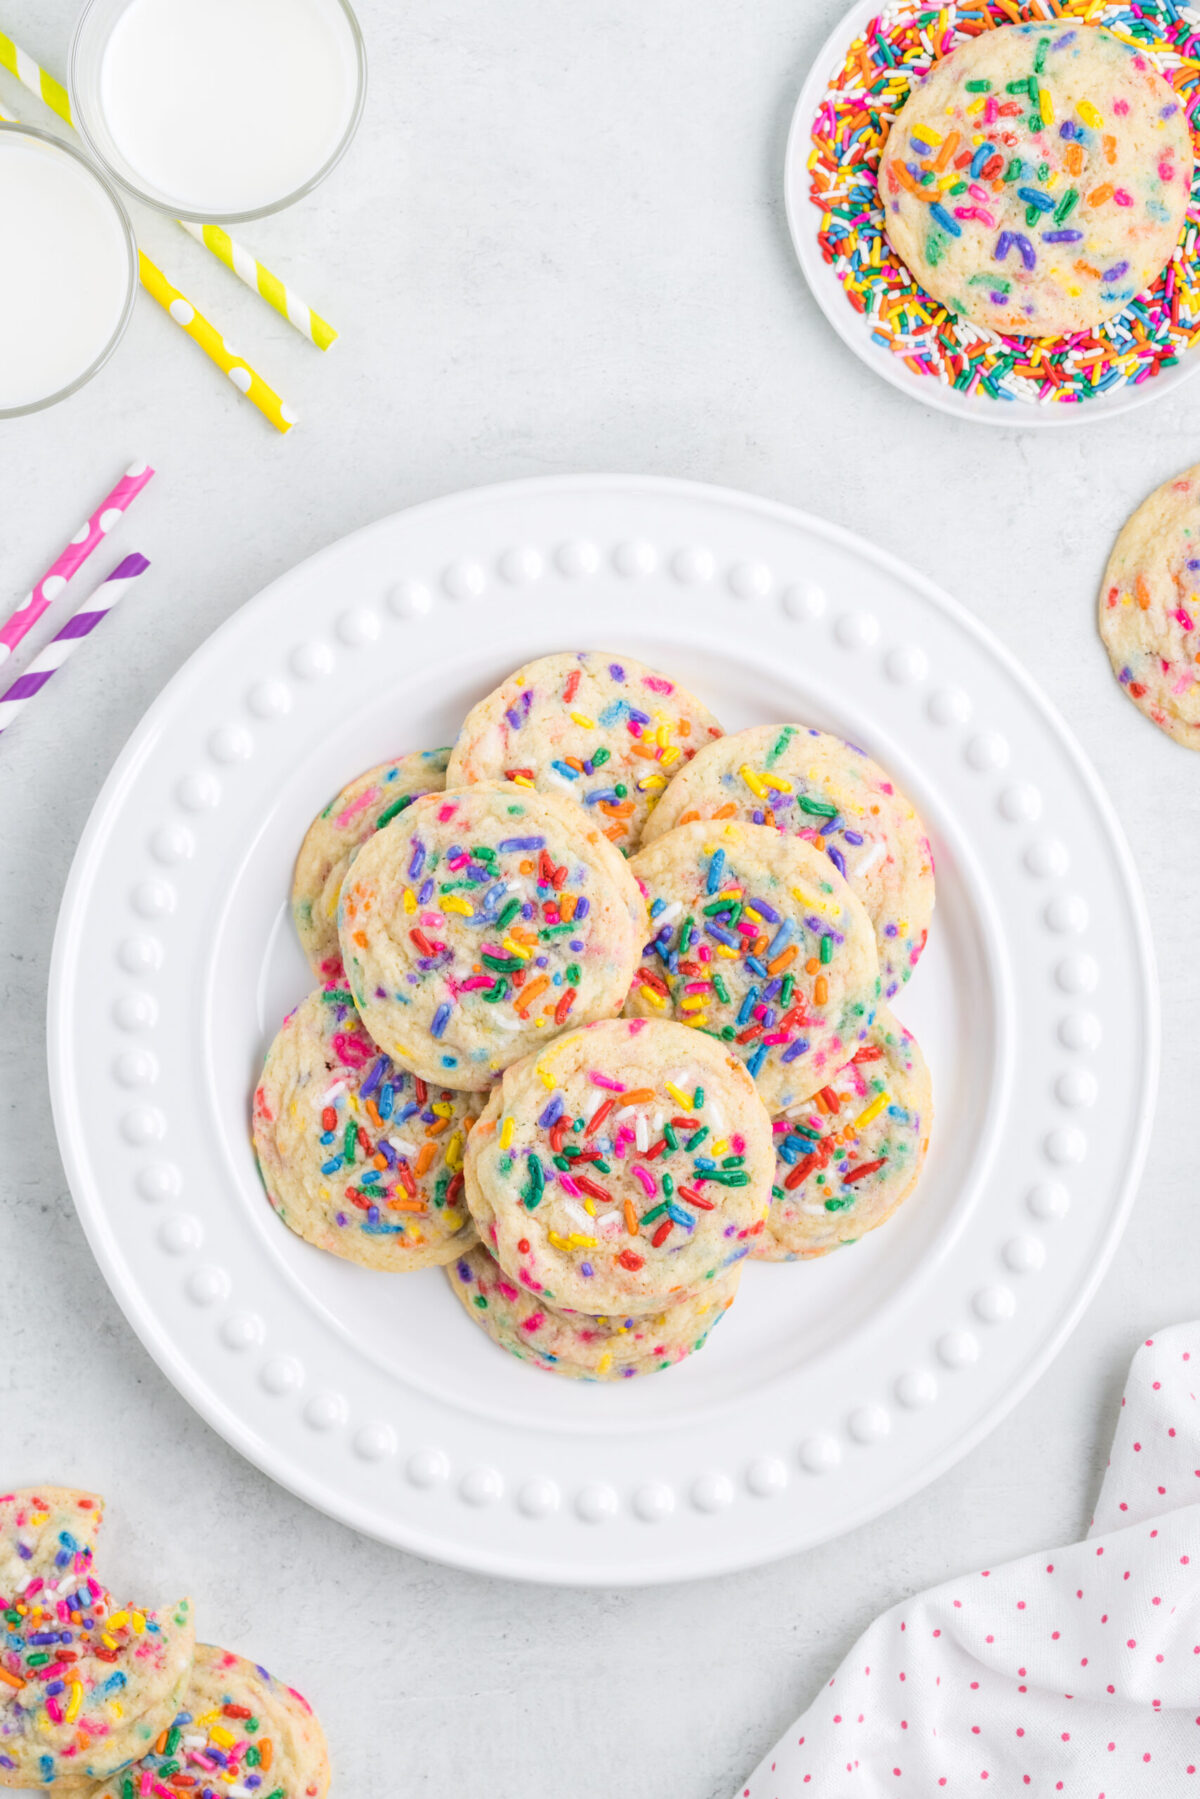 cookies spread out on a white plate in the centre, cookies top right with mor sprinkles circling the cooking, 2 glasses of milks top lip (top down view) with yellow, red and purple striped straws, more cookies bottom left and white linen bottom right